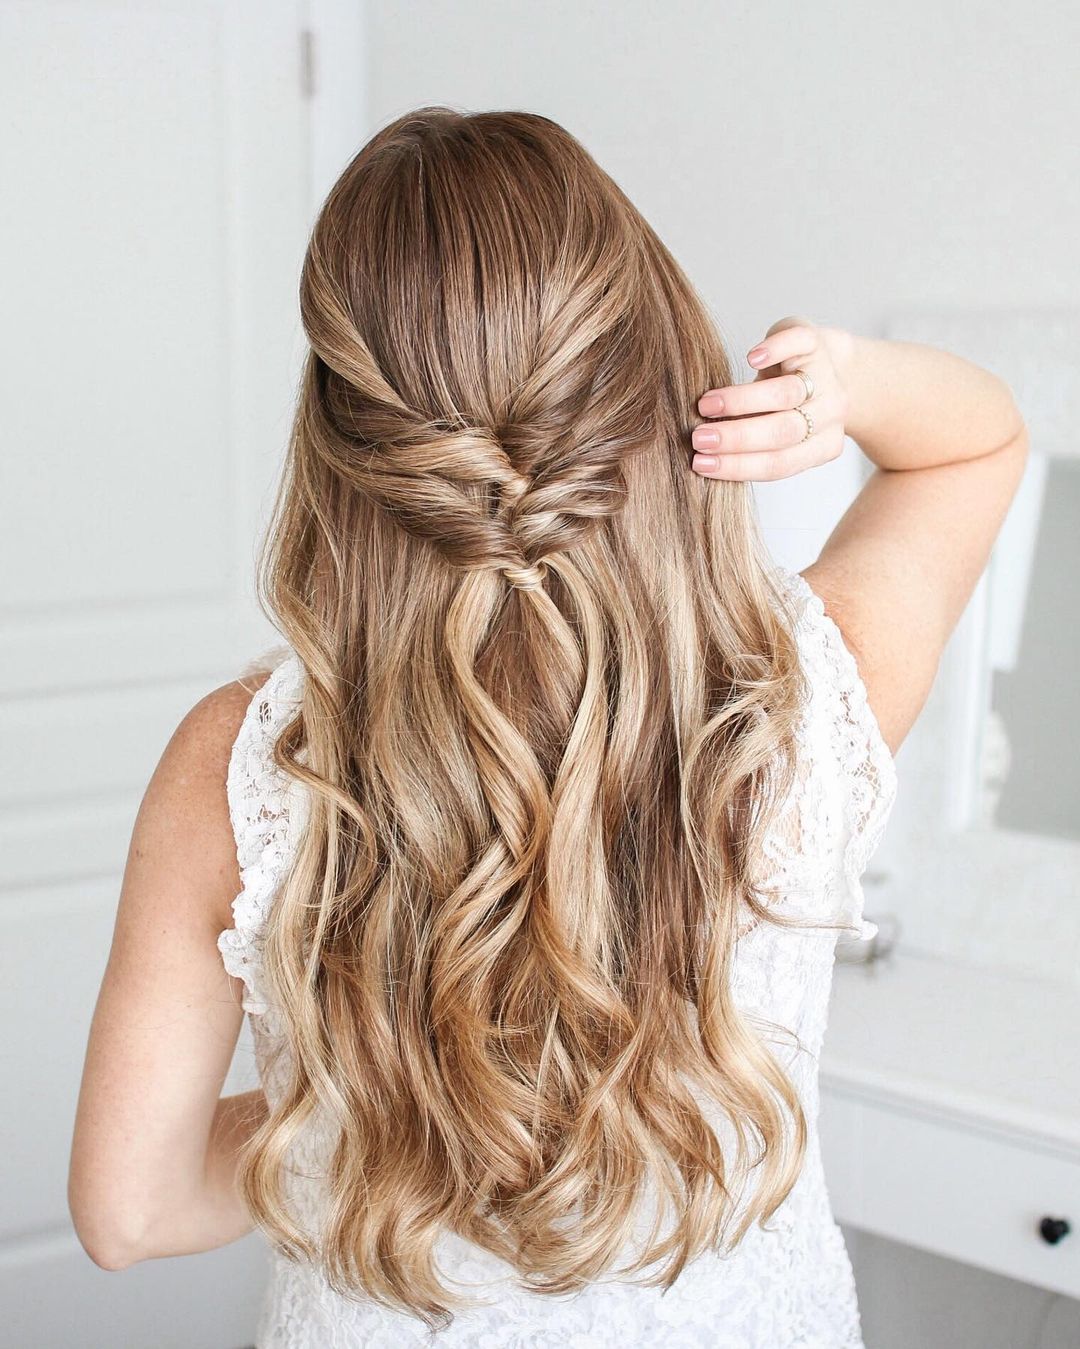 15 Hairstyles Easy For Long Hair Women To Achieve